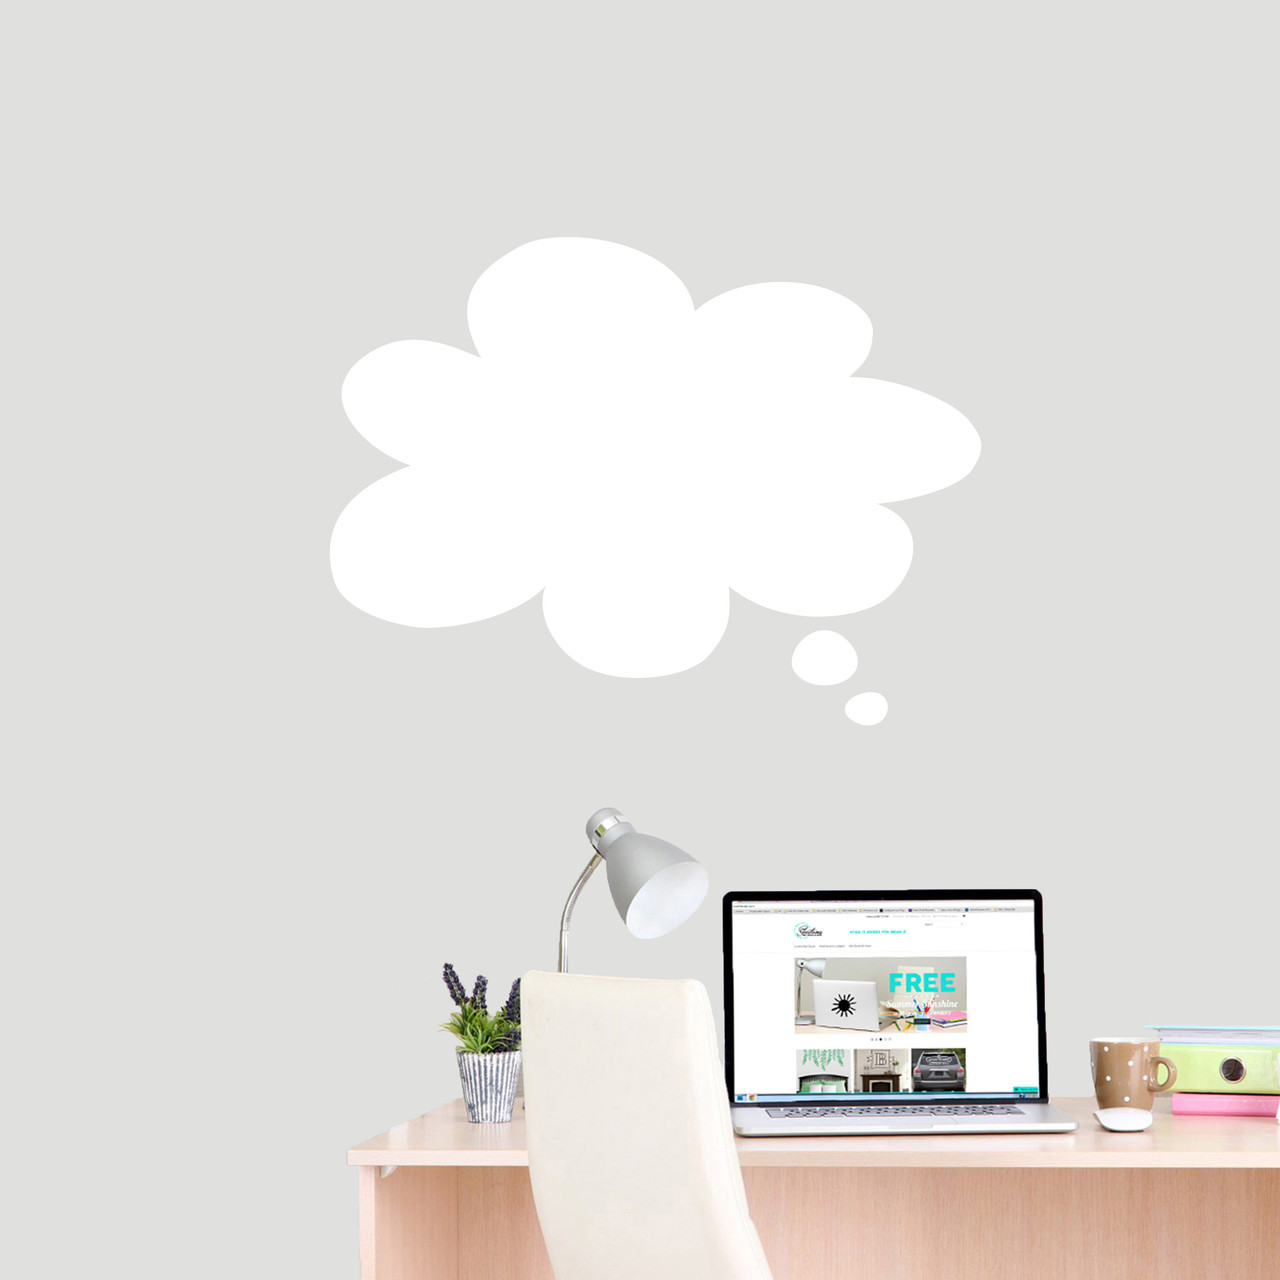 Dry Erase Thought Bubble Whiteboard Vinyl Decal Wall Vinyl 